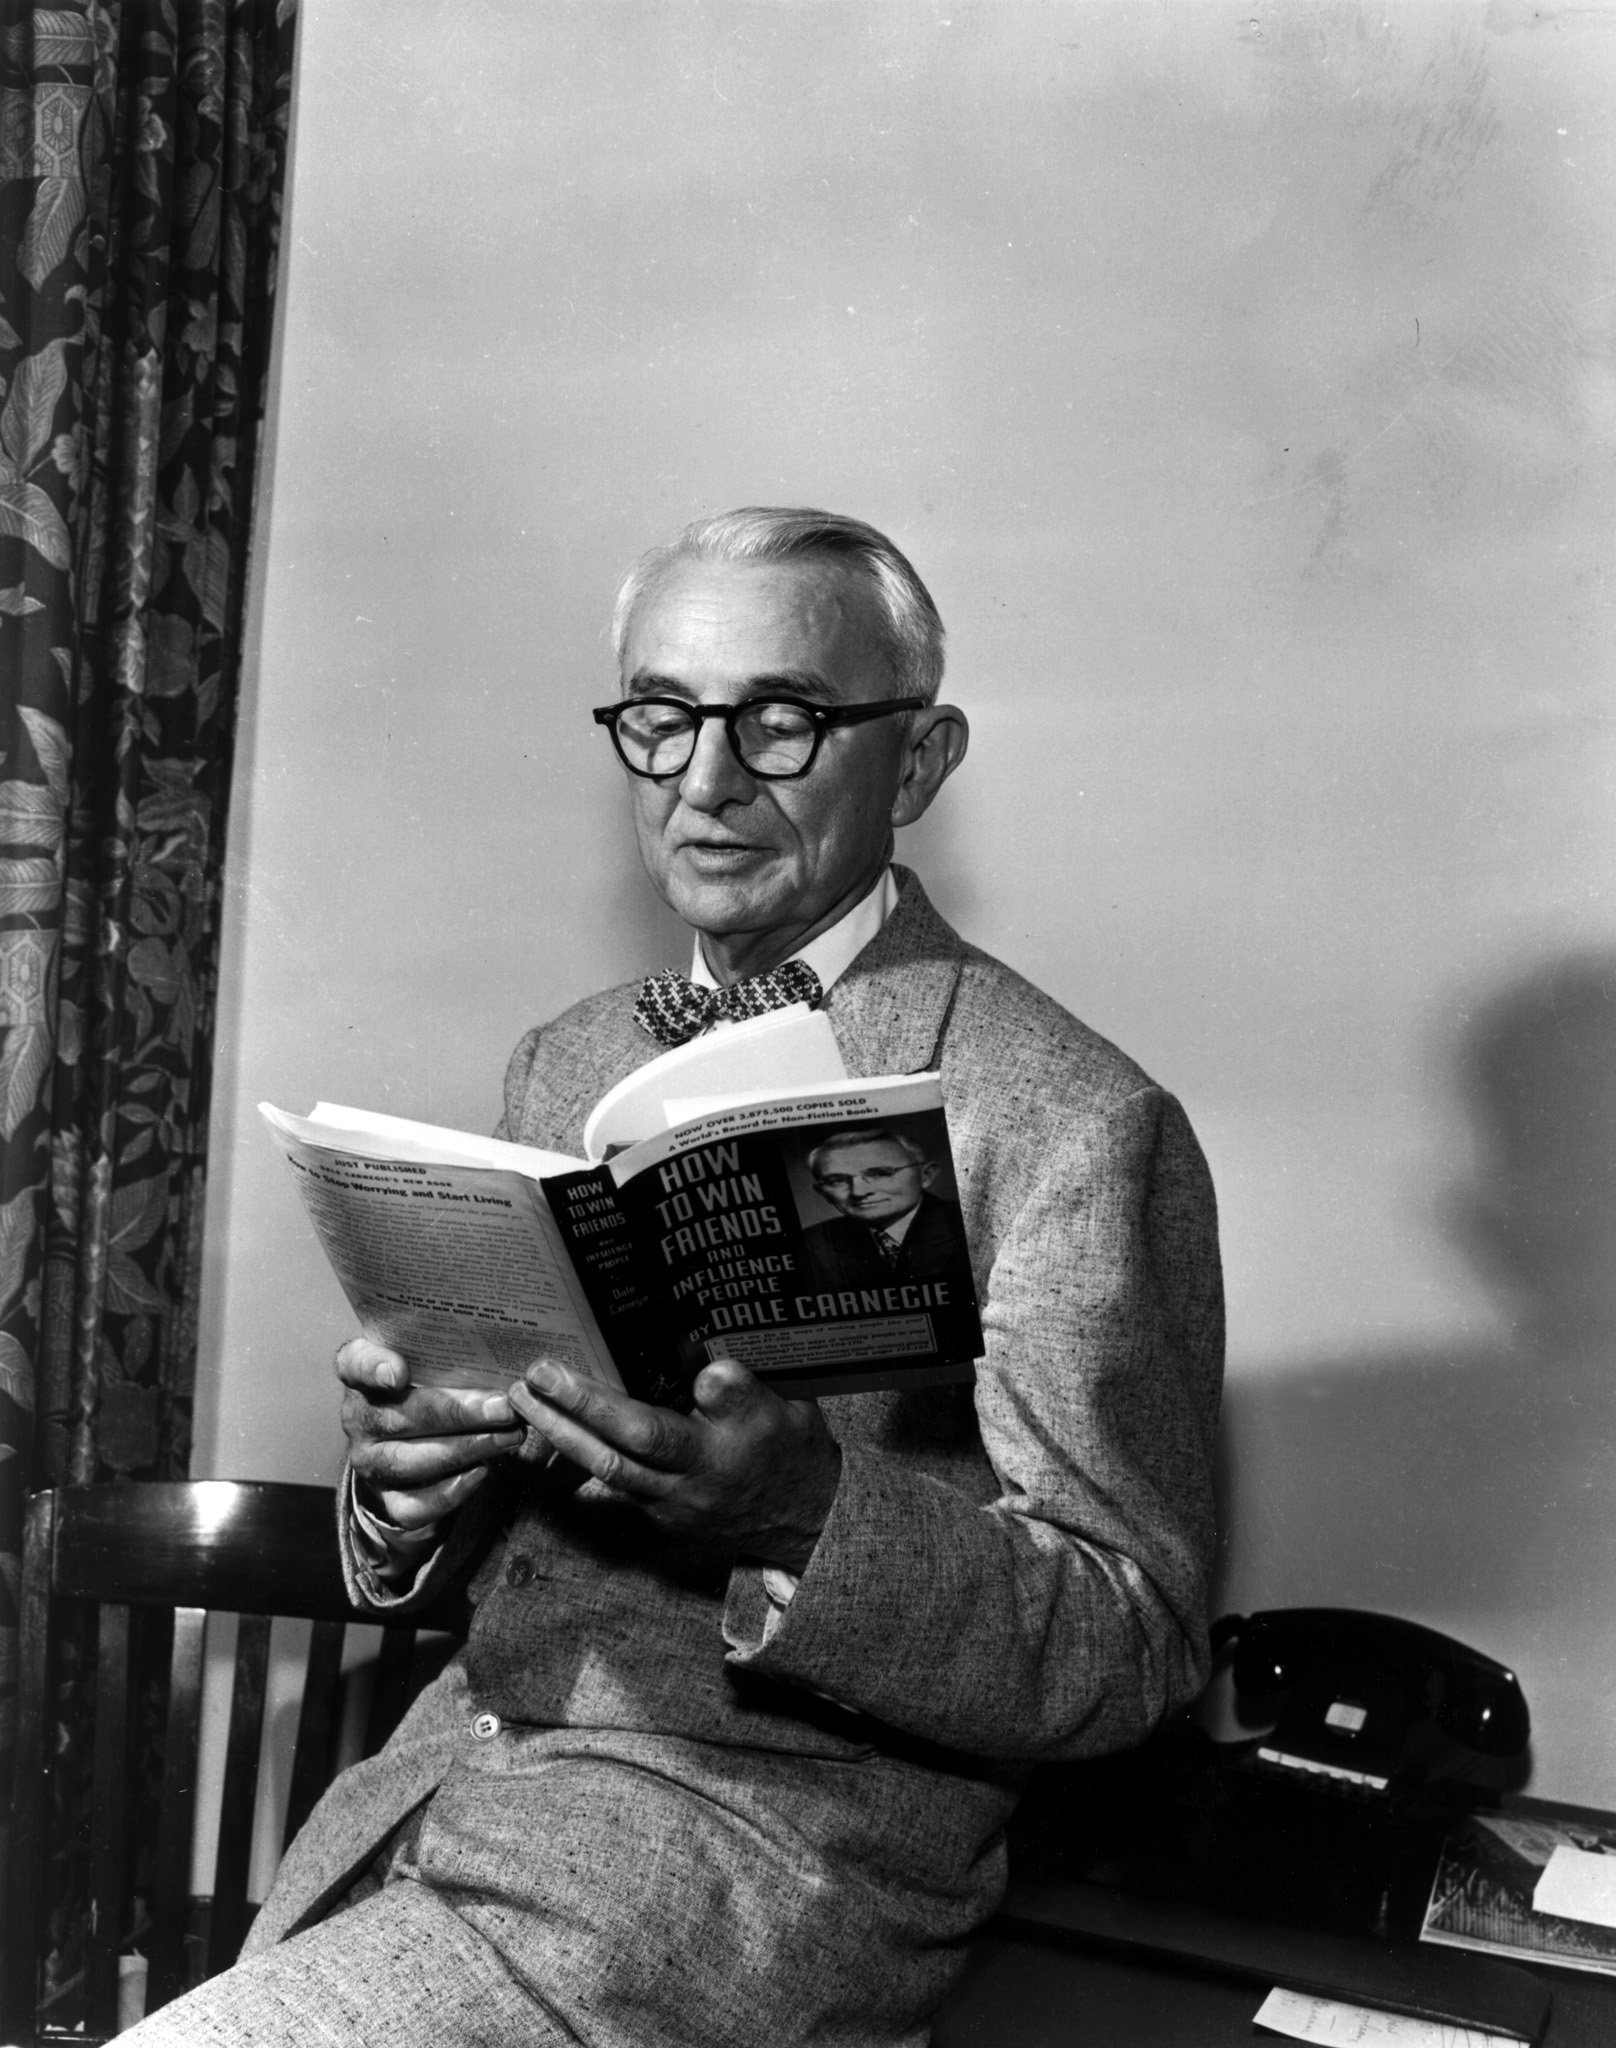 Dale Carnegie at the National Convention of the Sale Carnegie Institute of Effective Speaking and Human Relations on July 7, 1955.